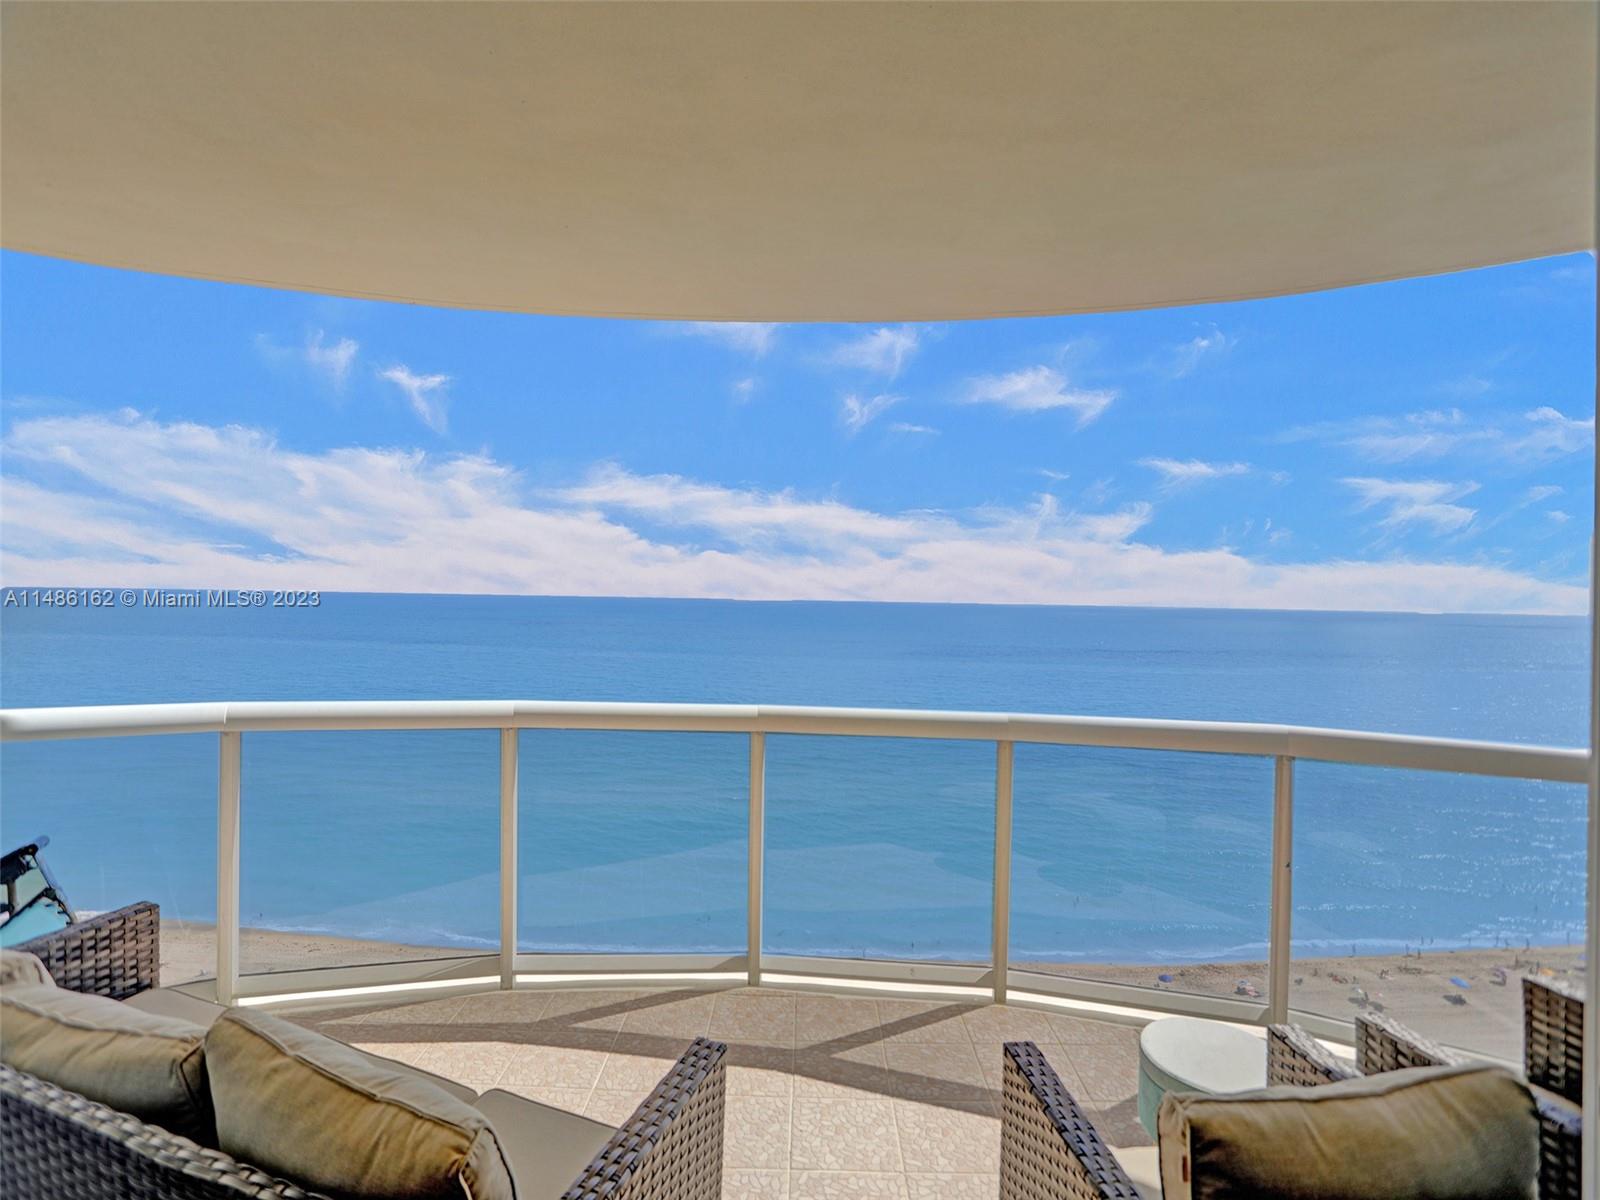 Beautiful 3-bed, 3-bath unit with ocean views at the coveted Pinnacle Condominium in Sunny Isles Beach.
The rental period is 6 months, plus 1 day. The residence is available right away.
Onsite management, tennis court, men and women spas, massage treatment room, billiards, ping pong, yoga, kids room, social room with large-screen tv, heated pool and spa, pool and beach service, valet service, 24-hour front desk, package delivery service, and much more.